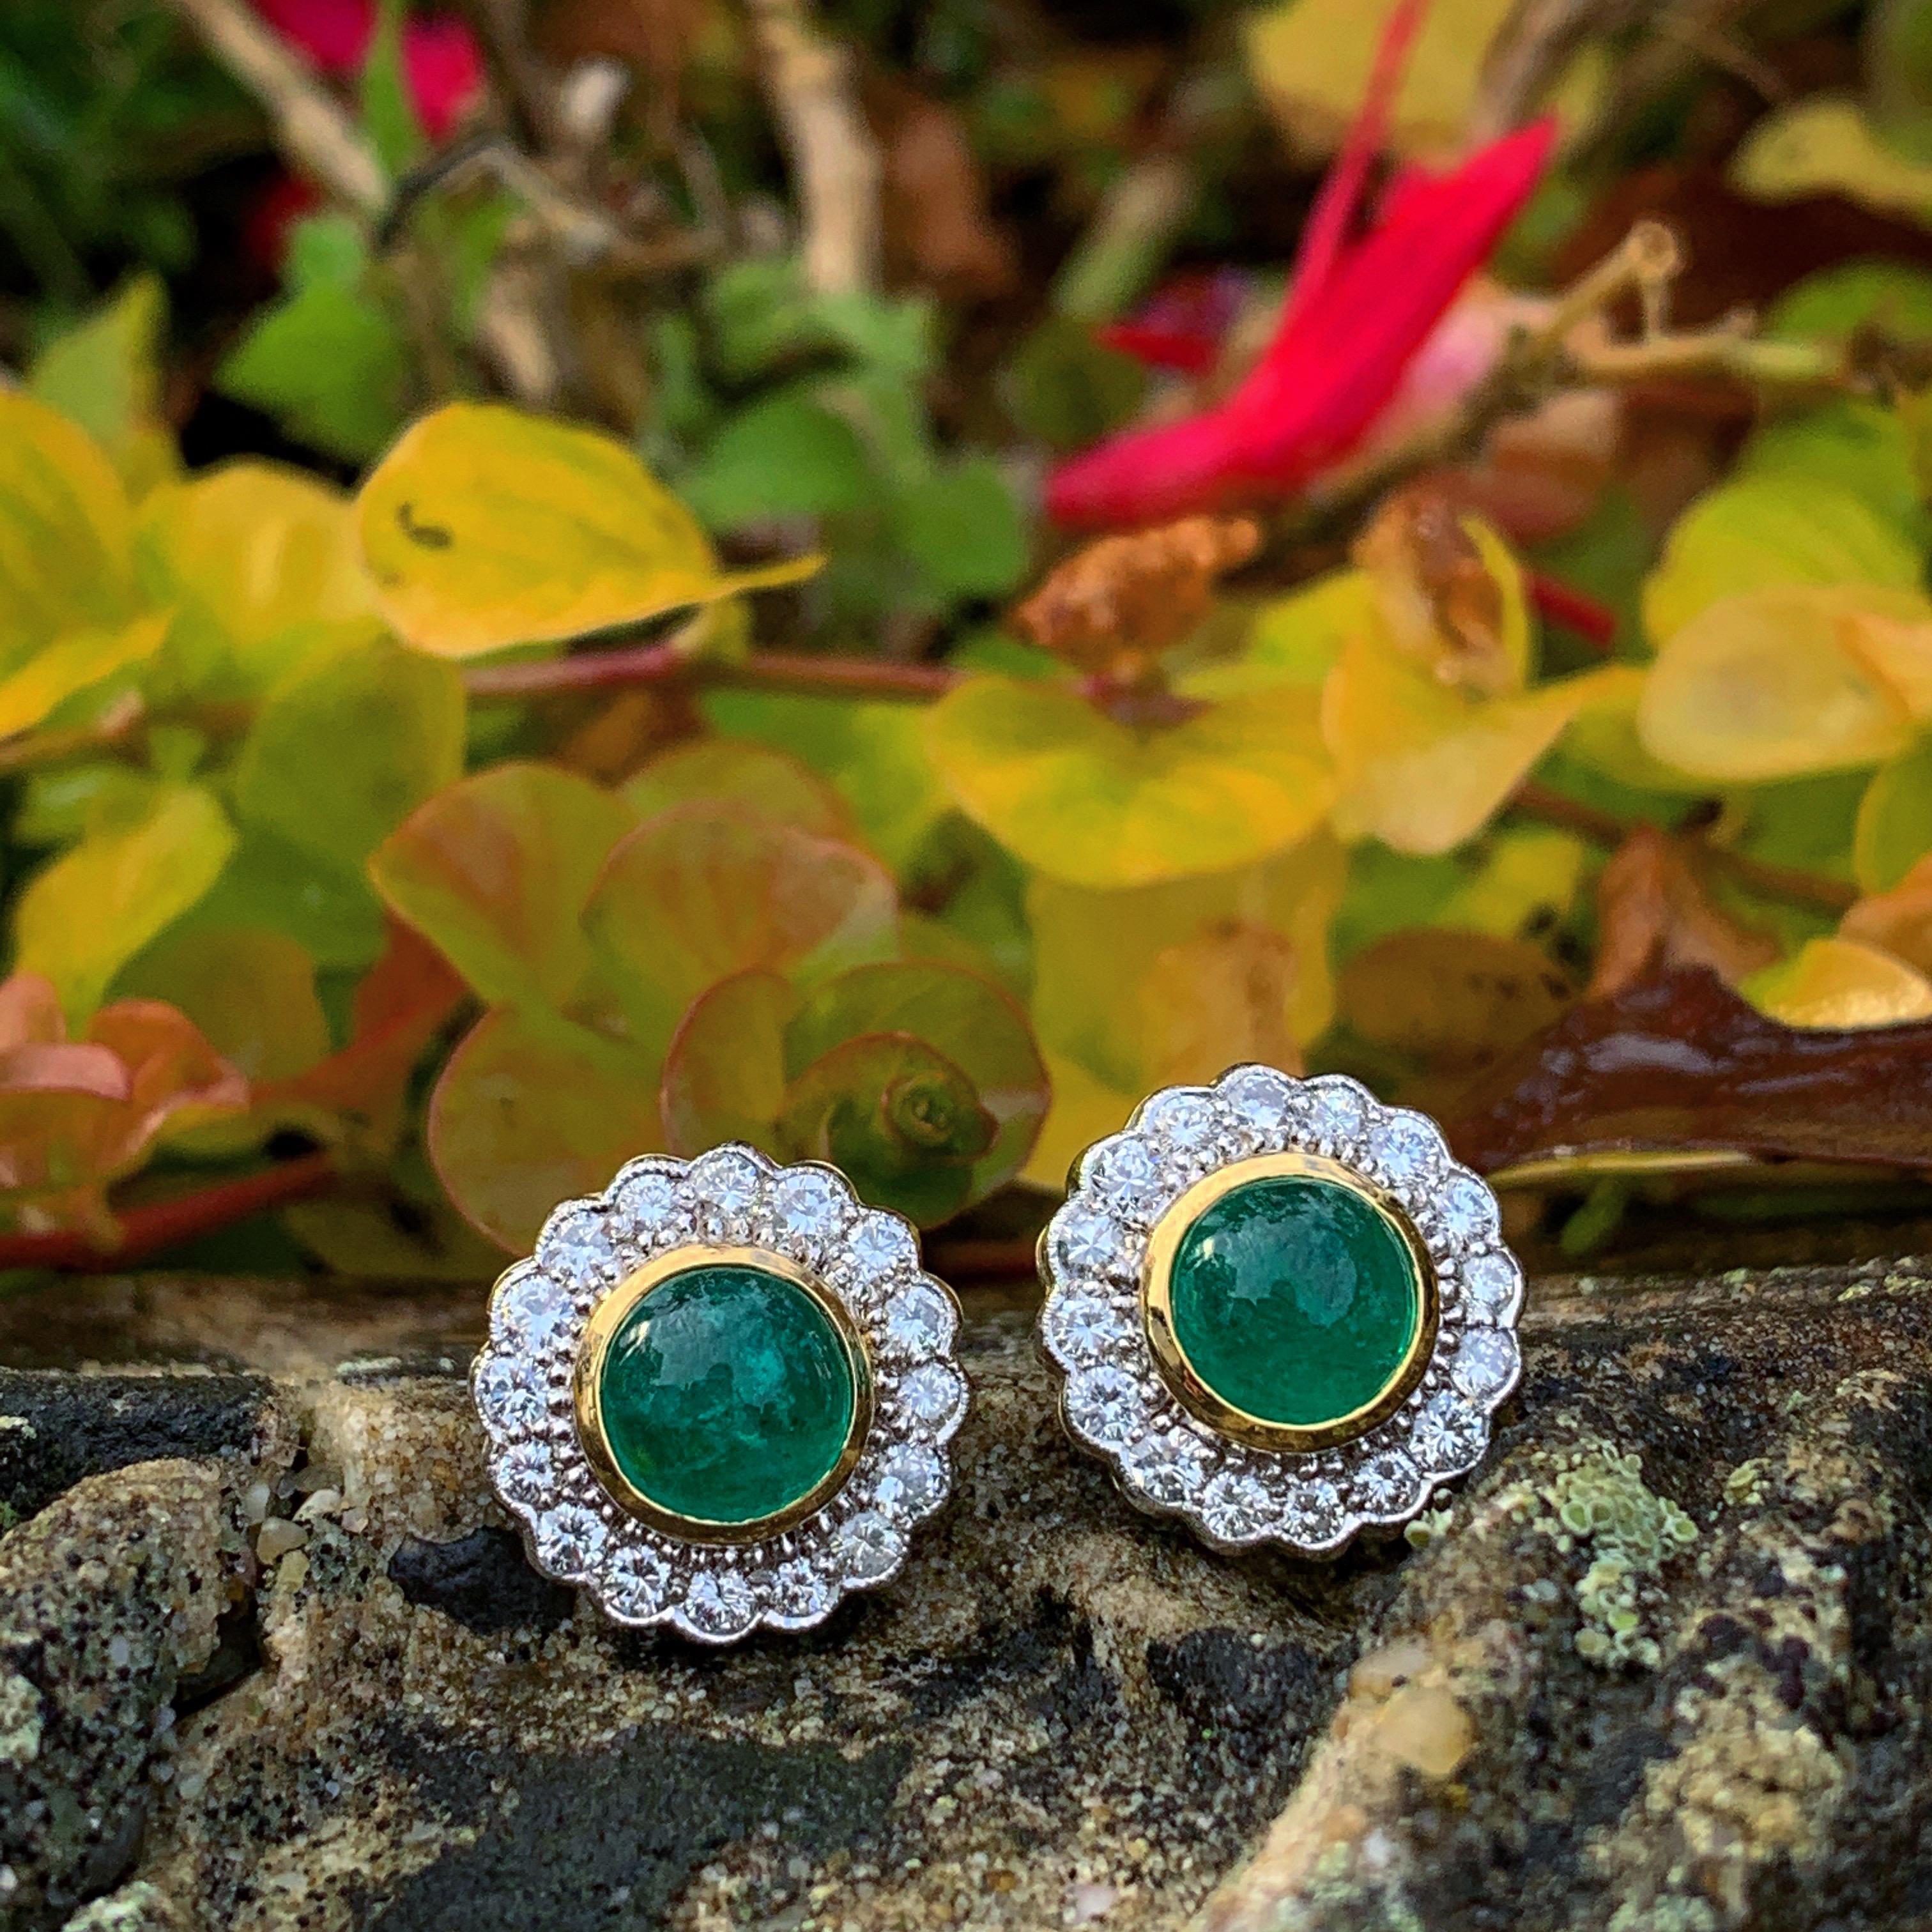 18 Karat Gold Round Cabochon Emerald and Diamond Art Deco Style Earrings For Sale 3